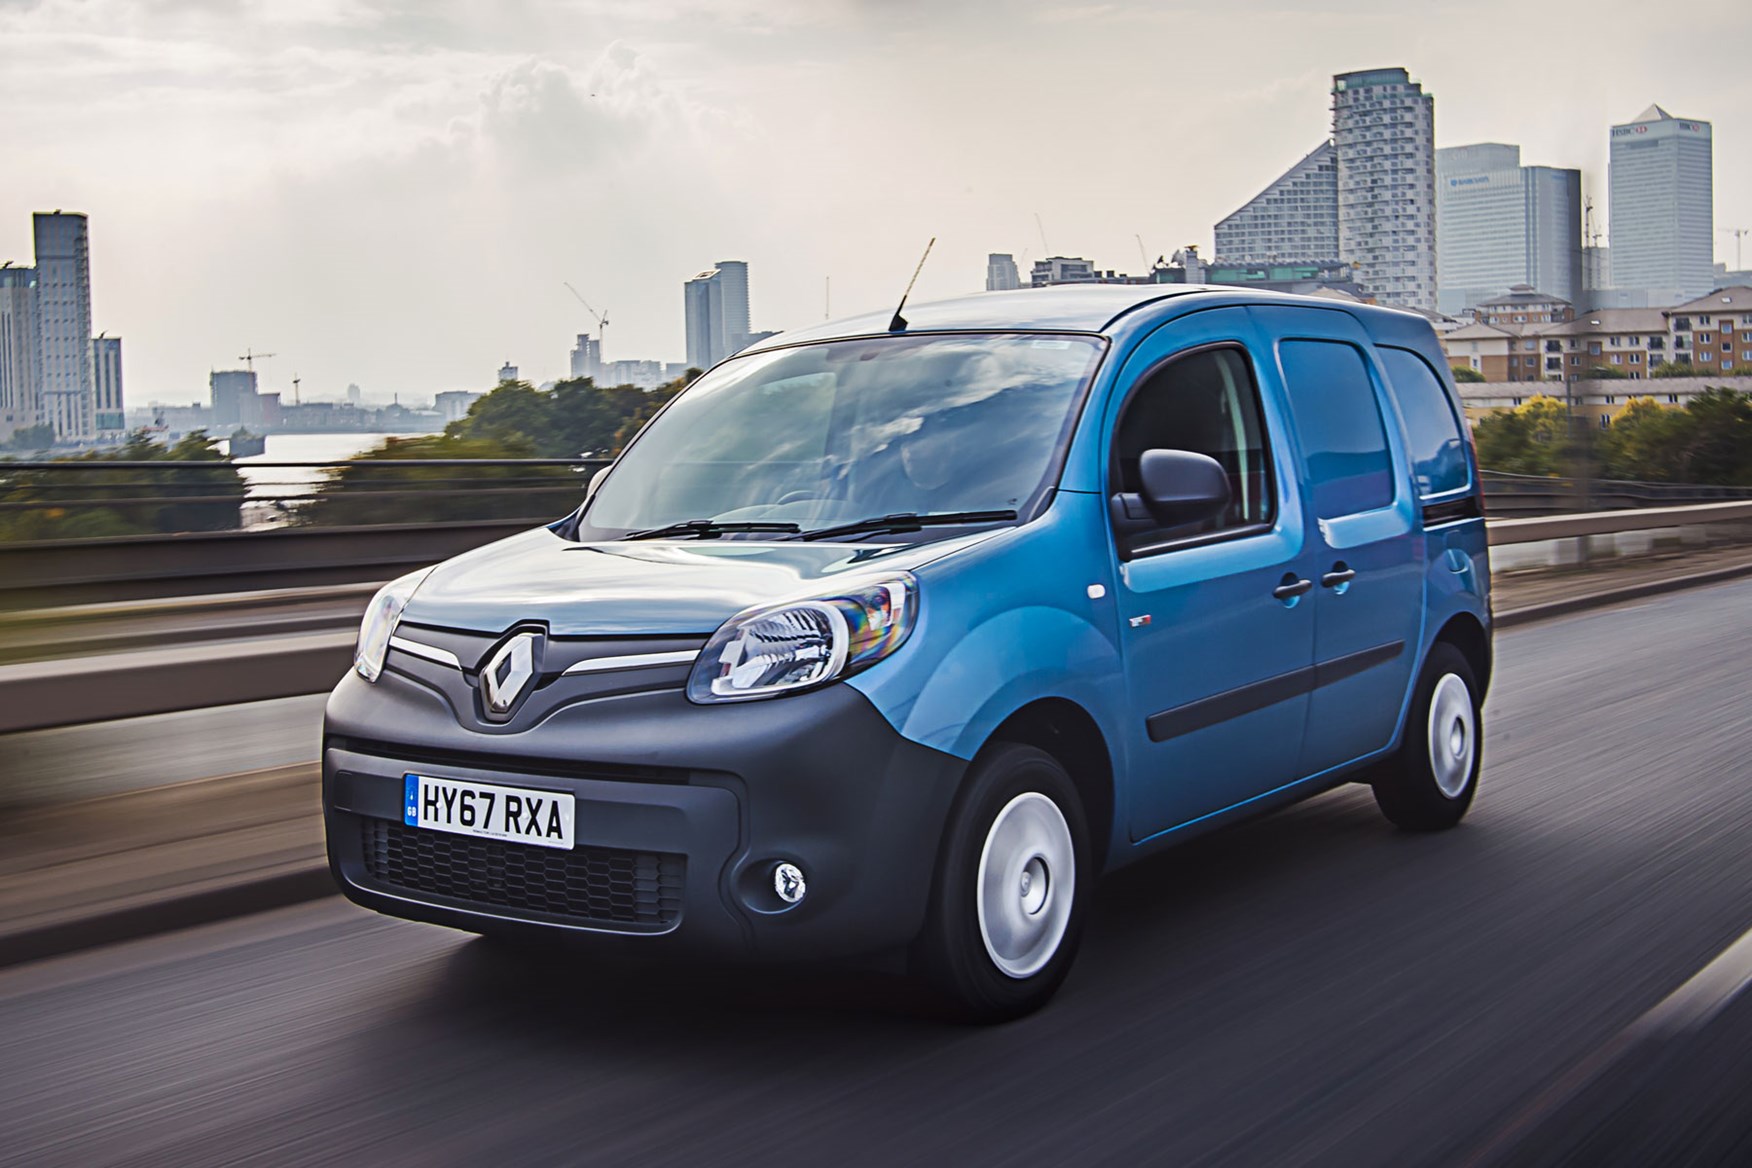 Renault Kangoo Ze Review and Buyers Guide